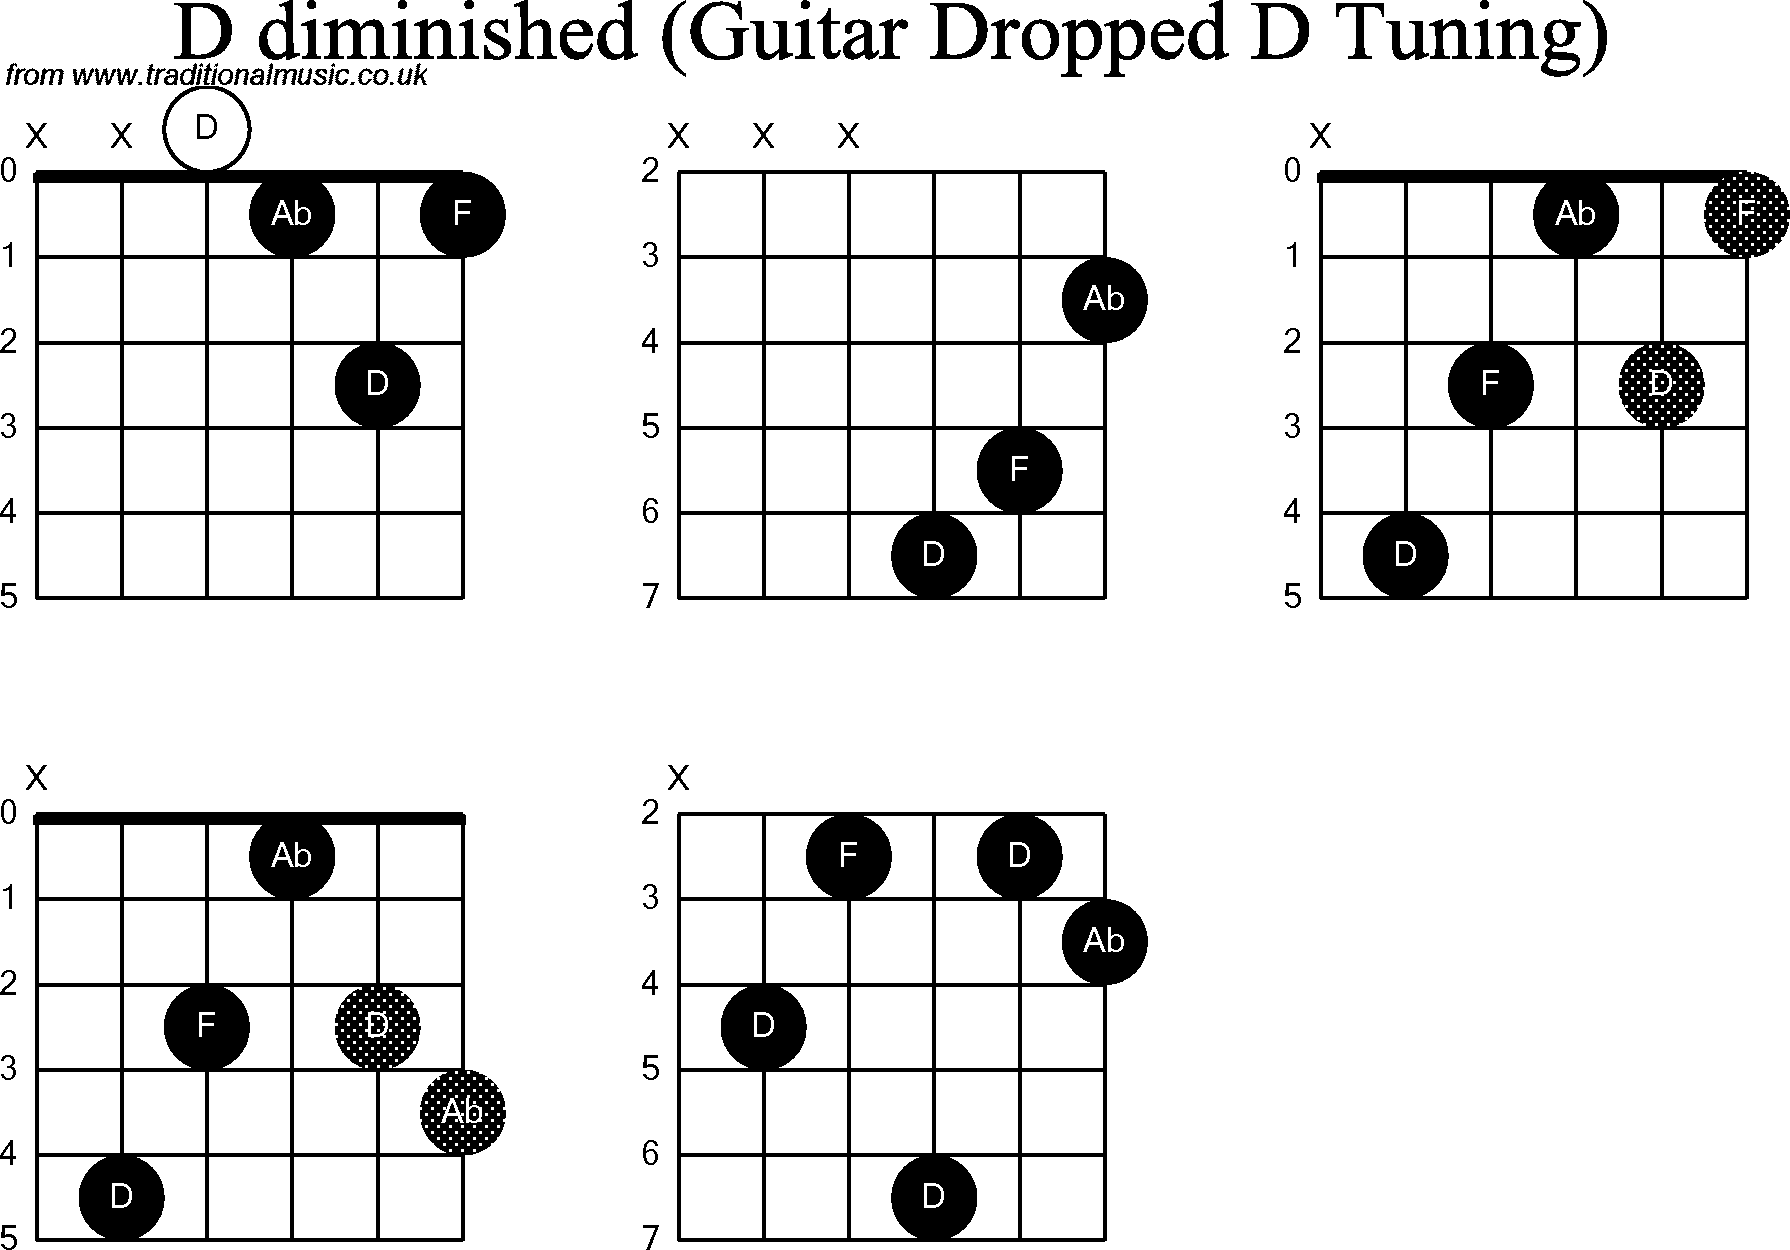 Chord diagrams for dropped D Guitar(DADGBE), D Diminished